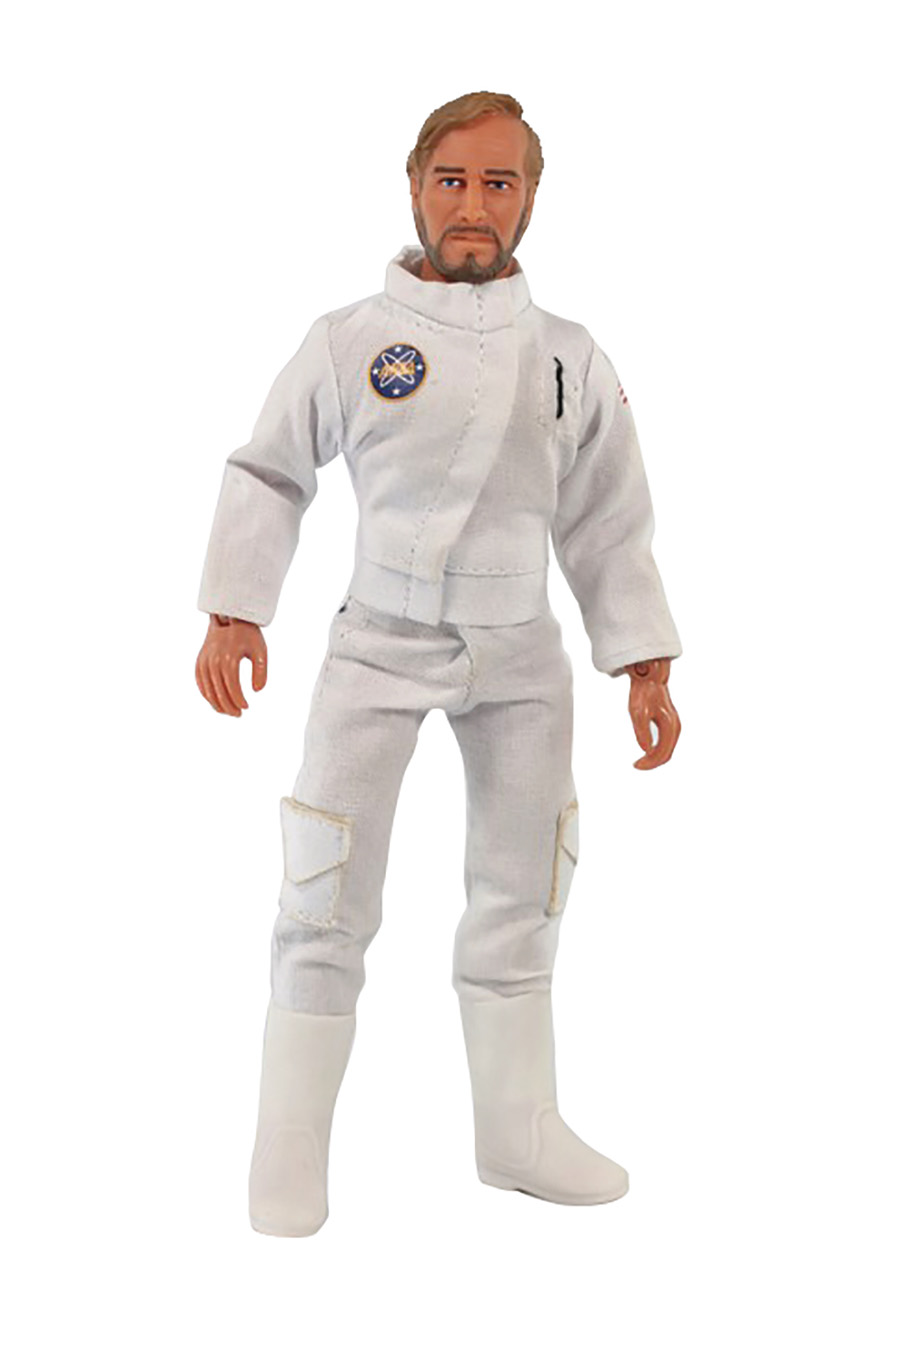 Mego Planet Of The Apes 8-Inch Action Figure - Taylor (Astronaut)